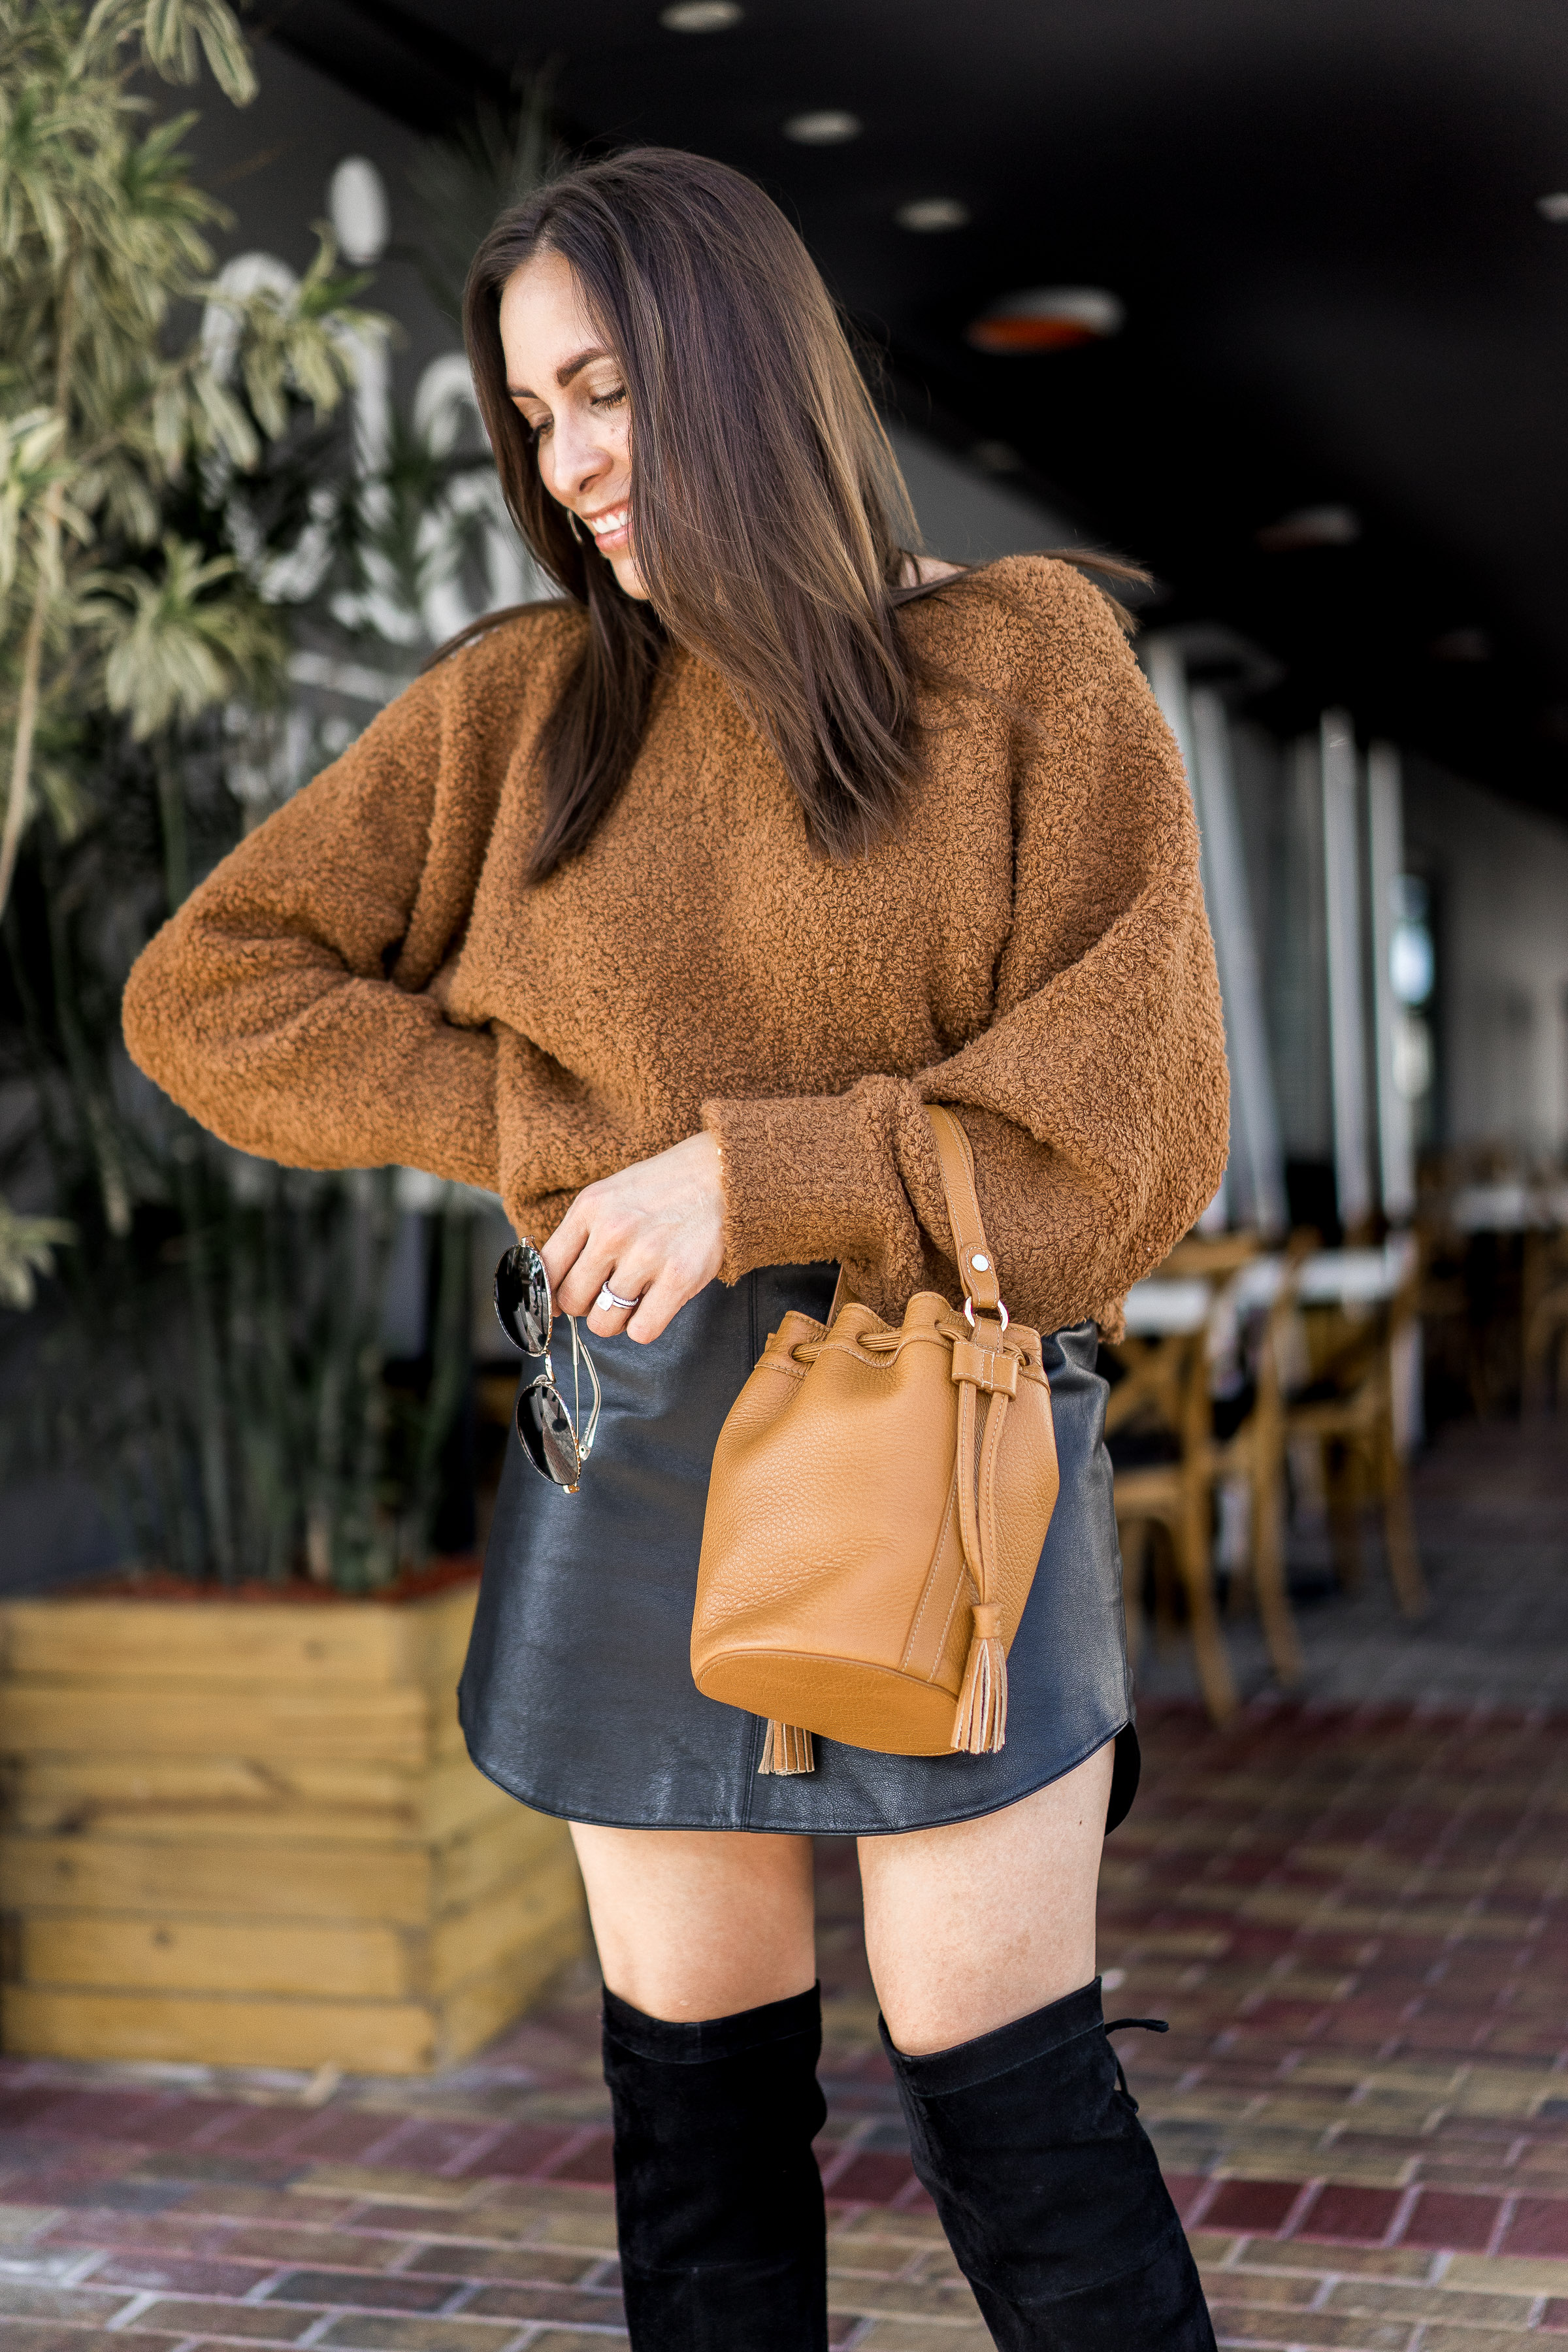 Winter mini skirt outfit